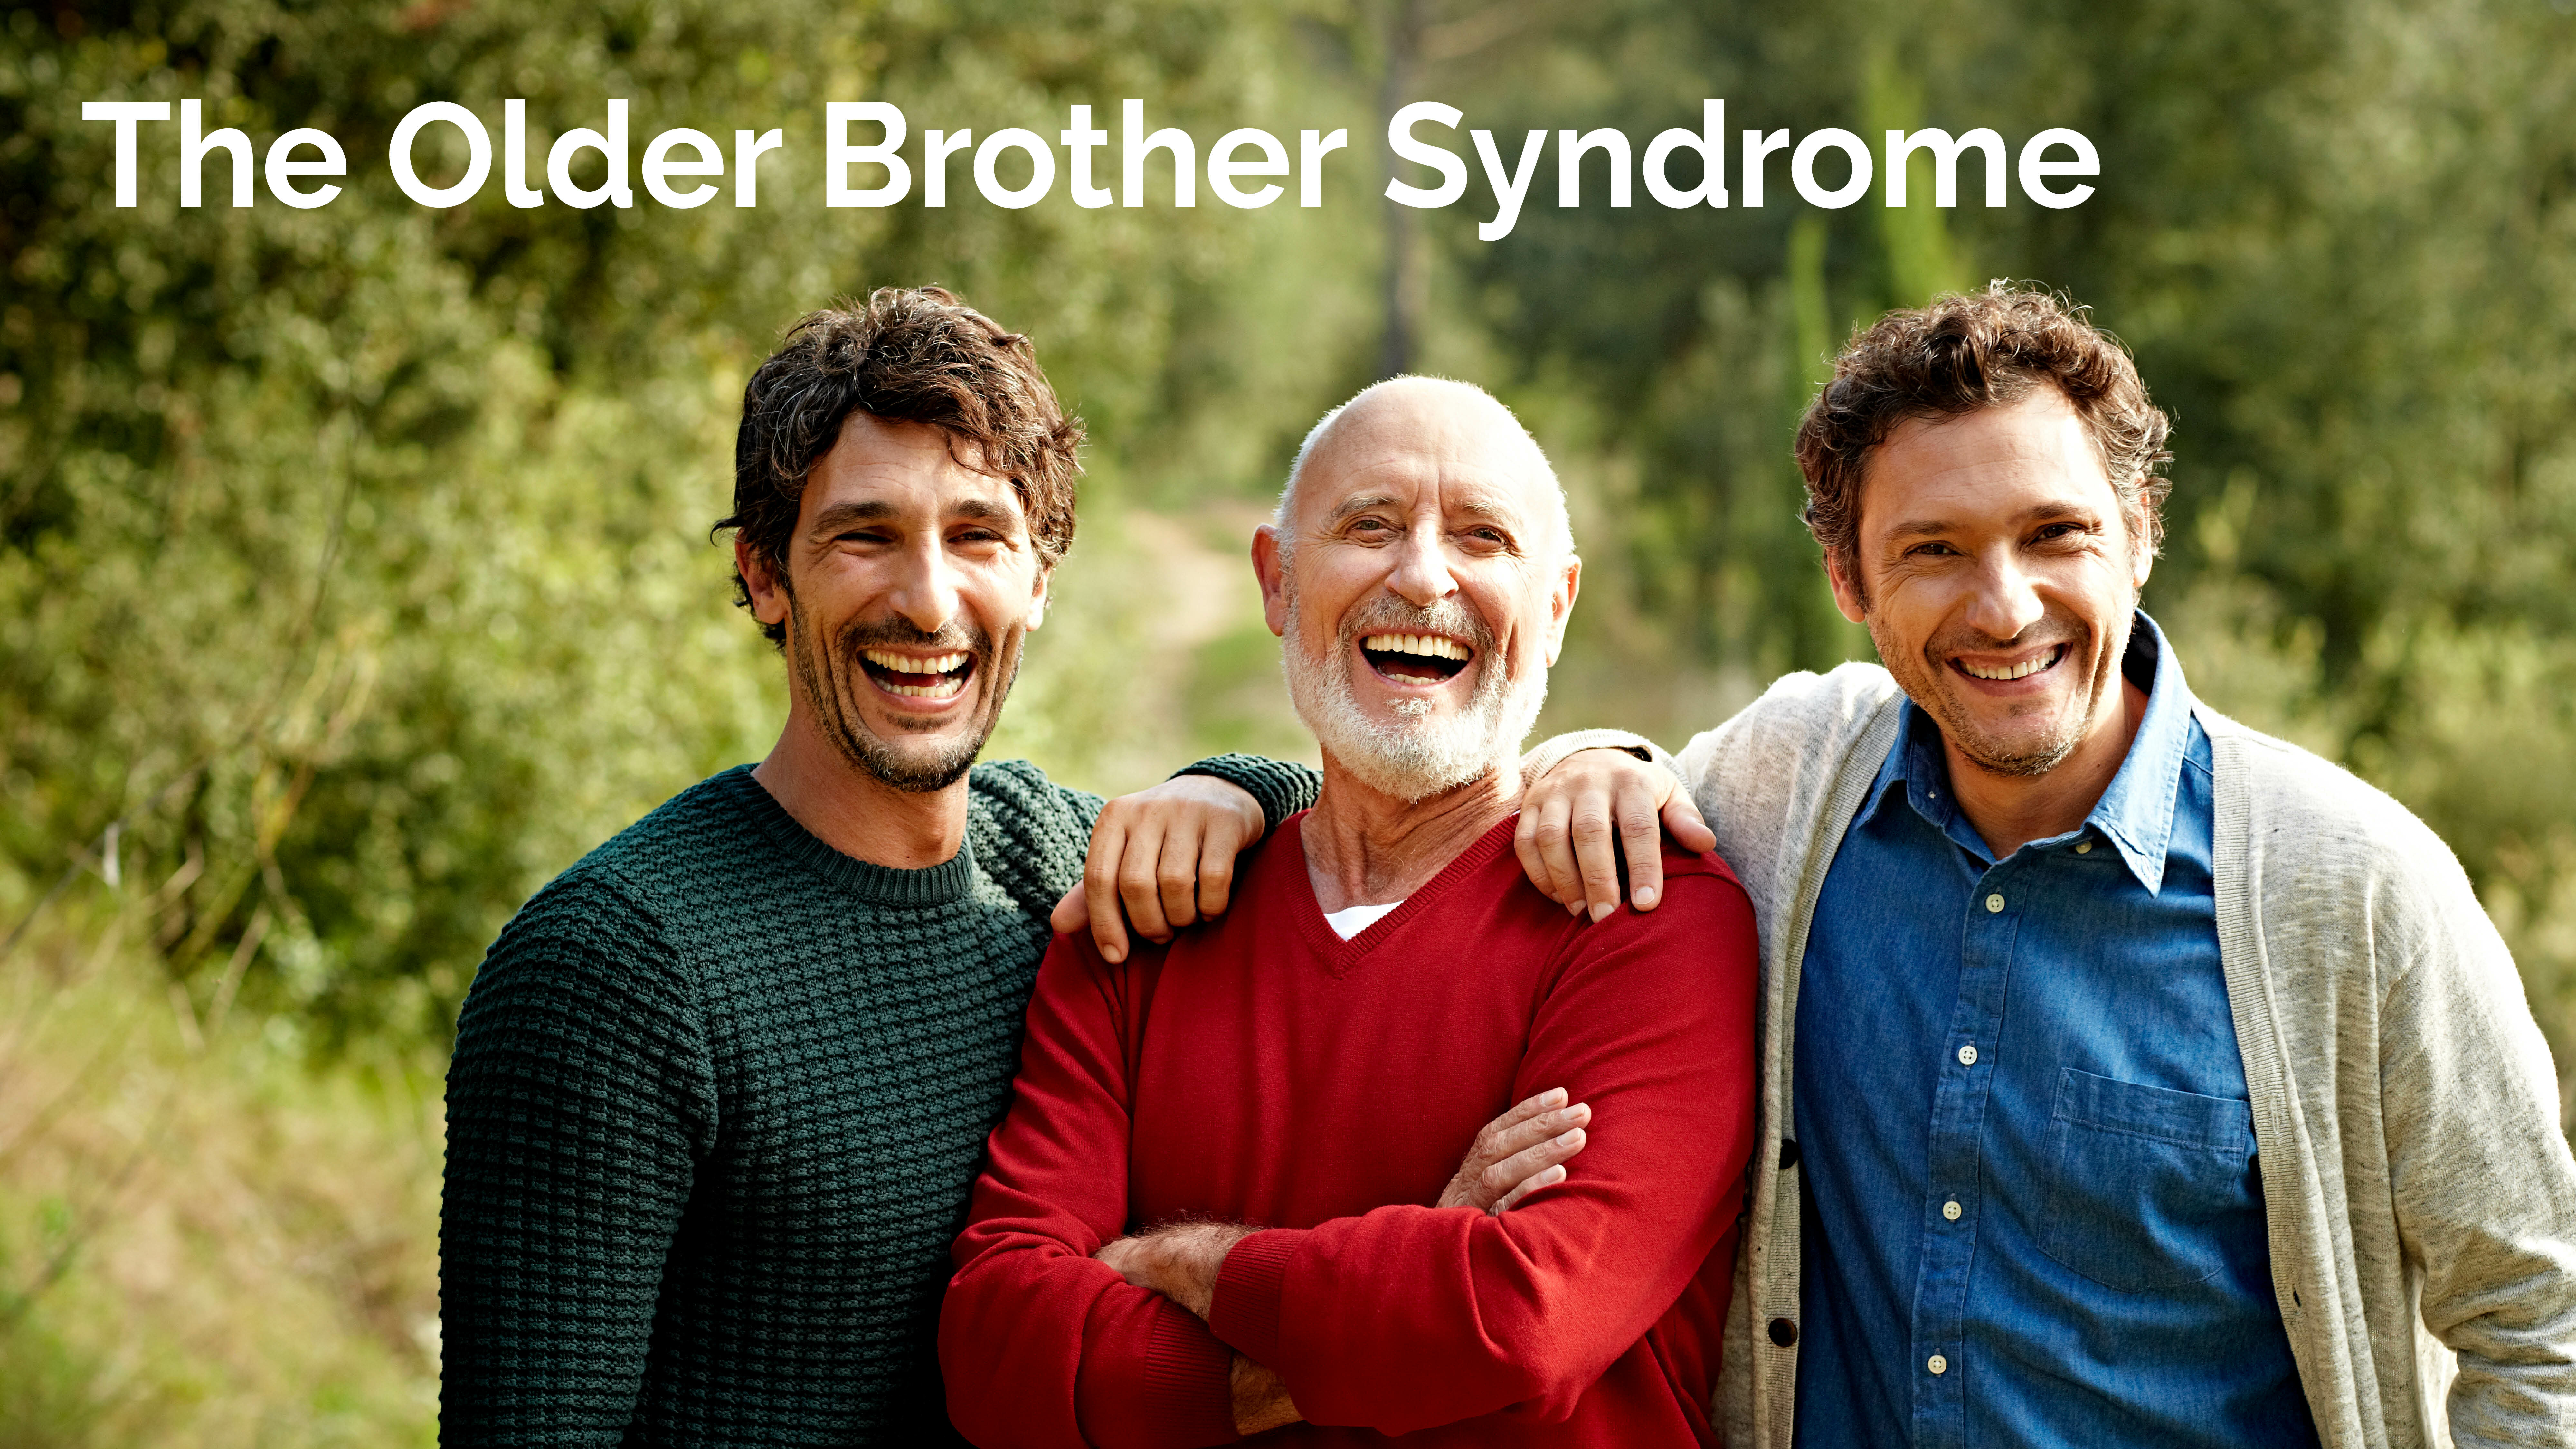 The Older Brother Syndrome